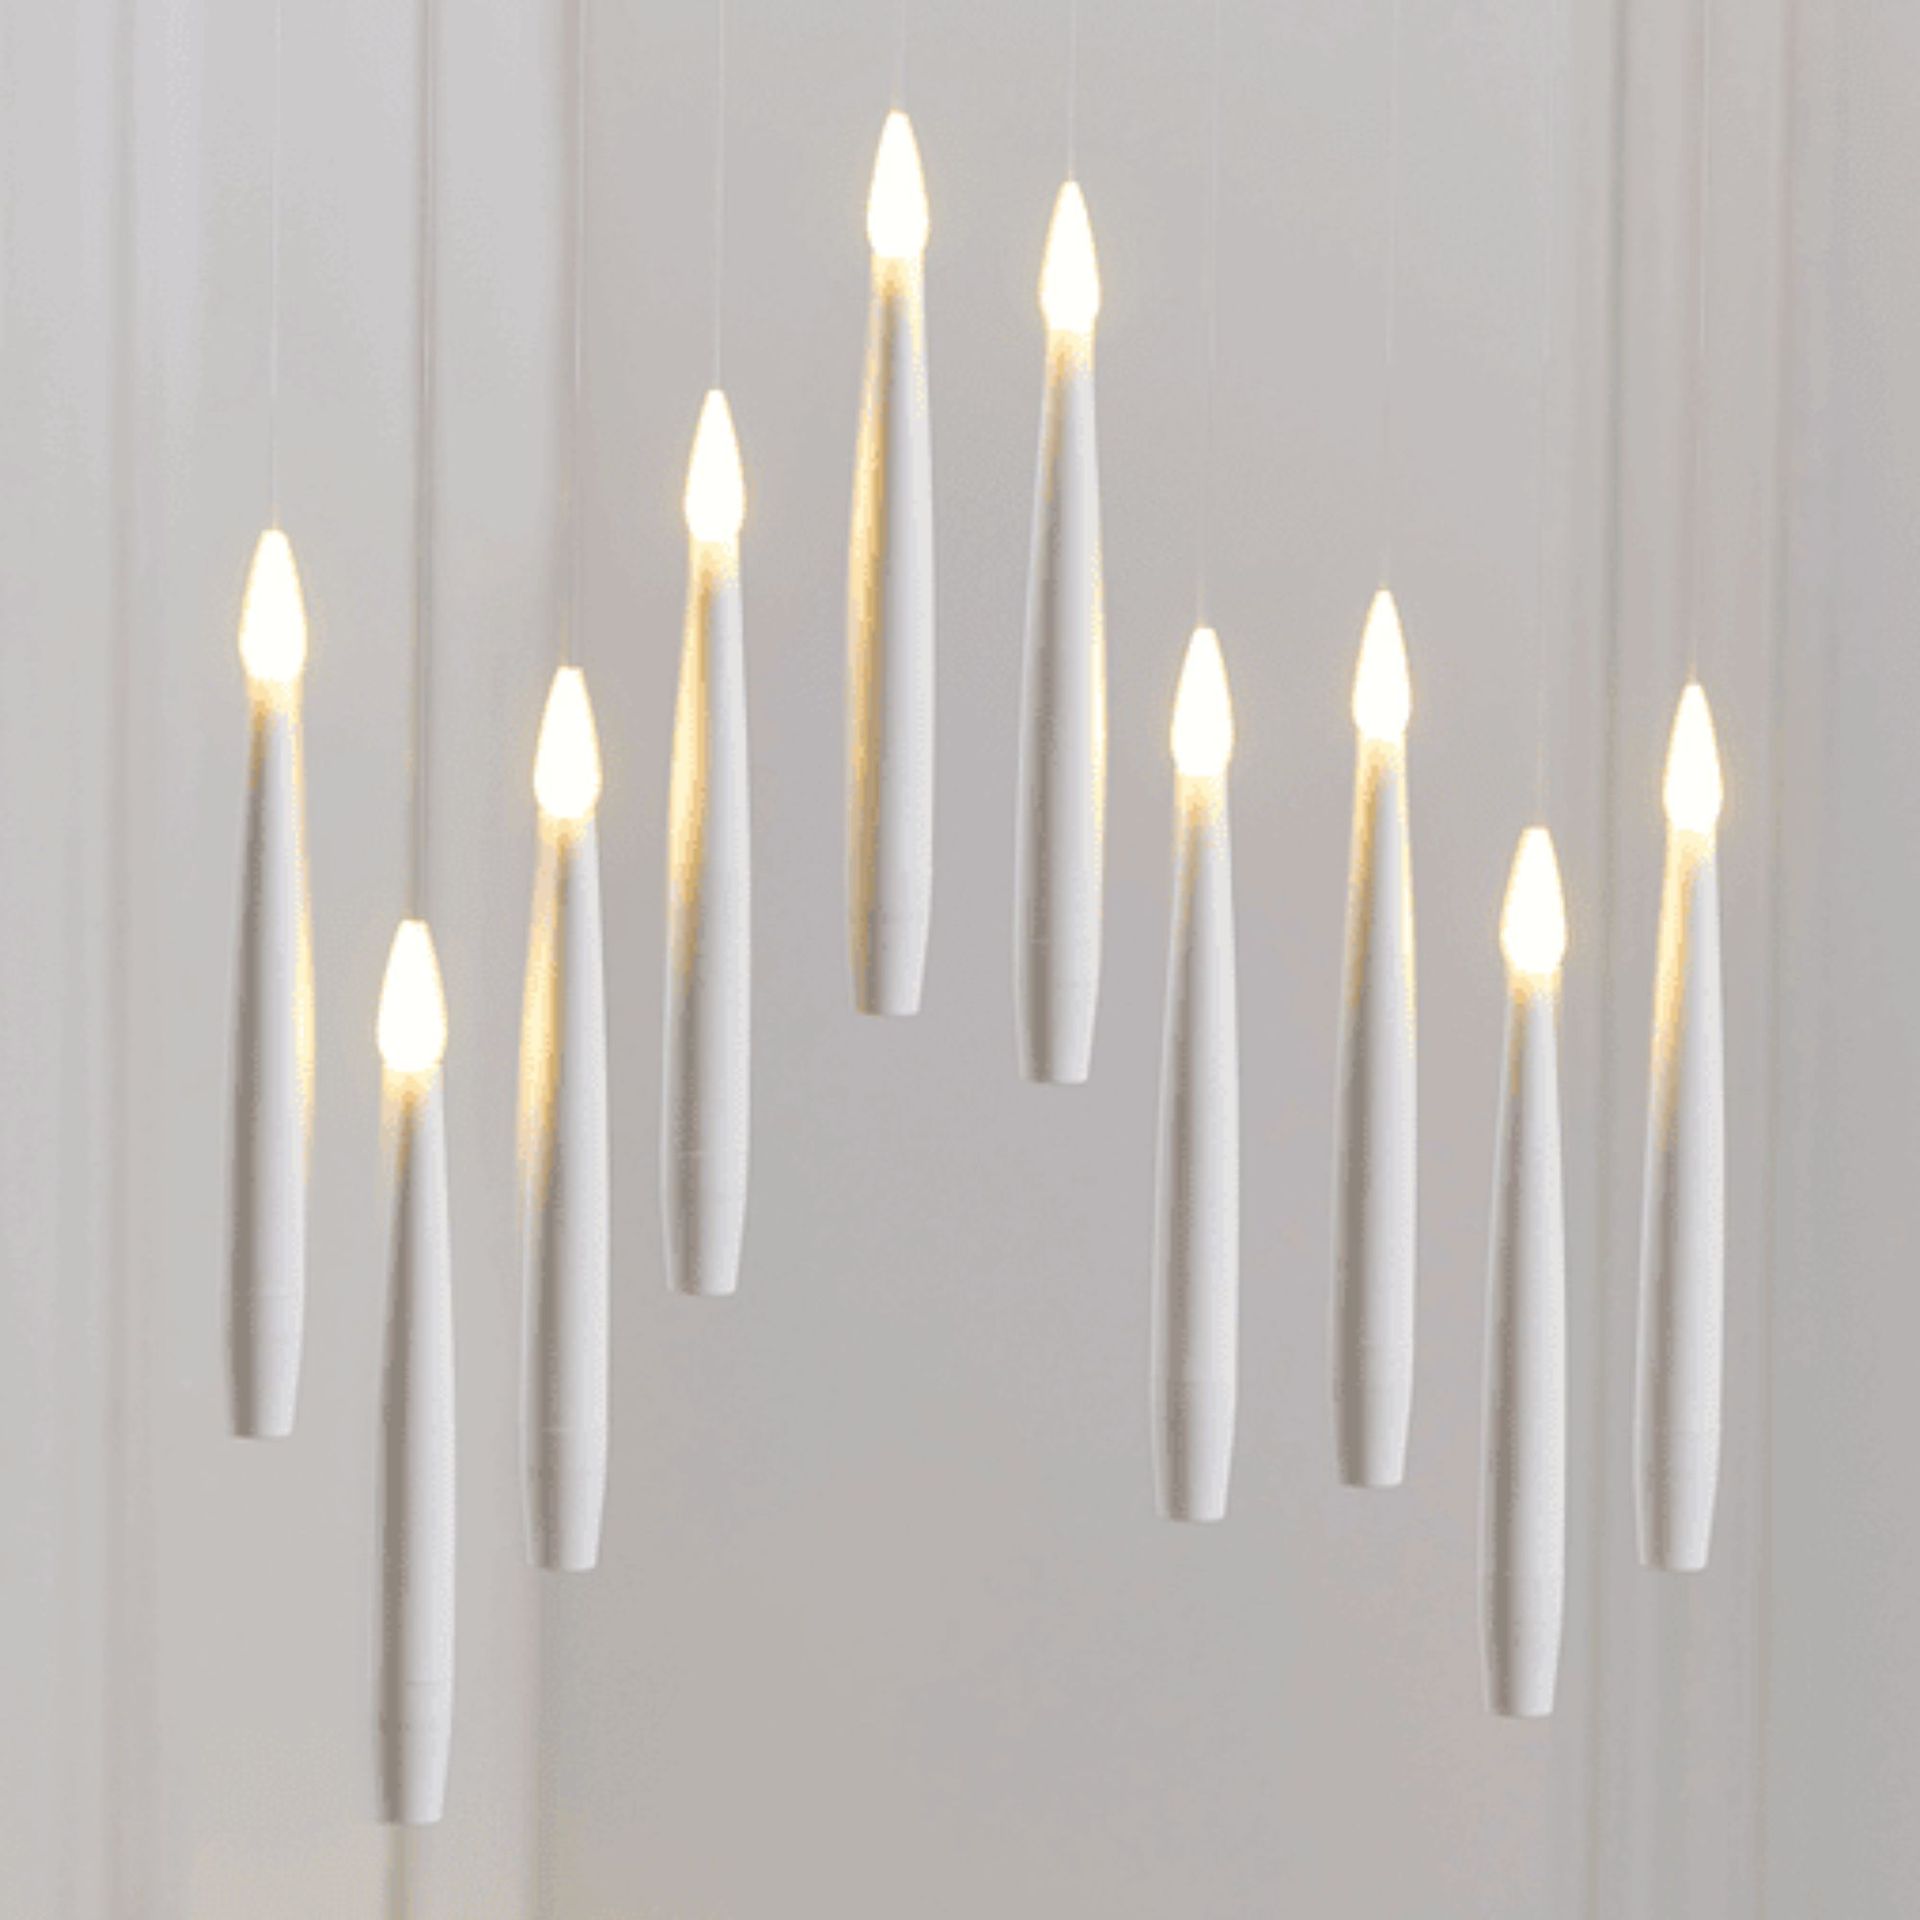 Best Christmas lights to make your home shine bright this season ...